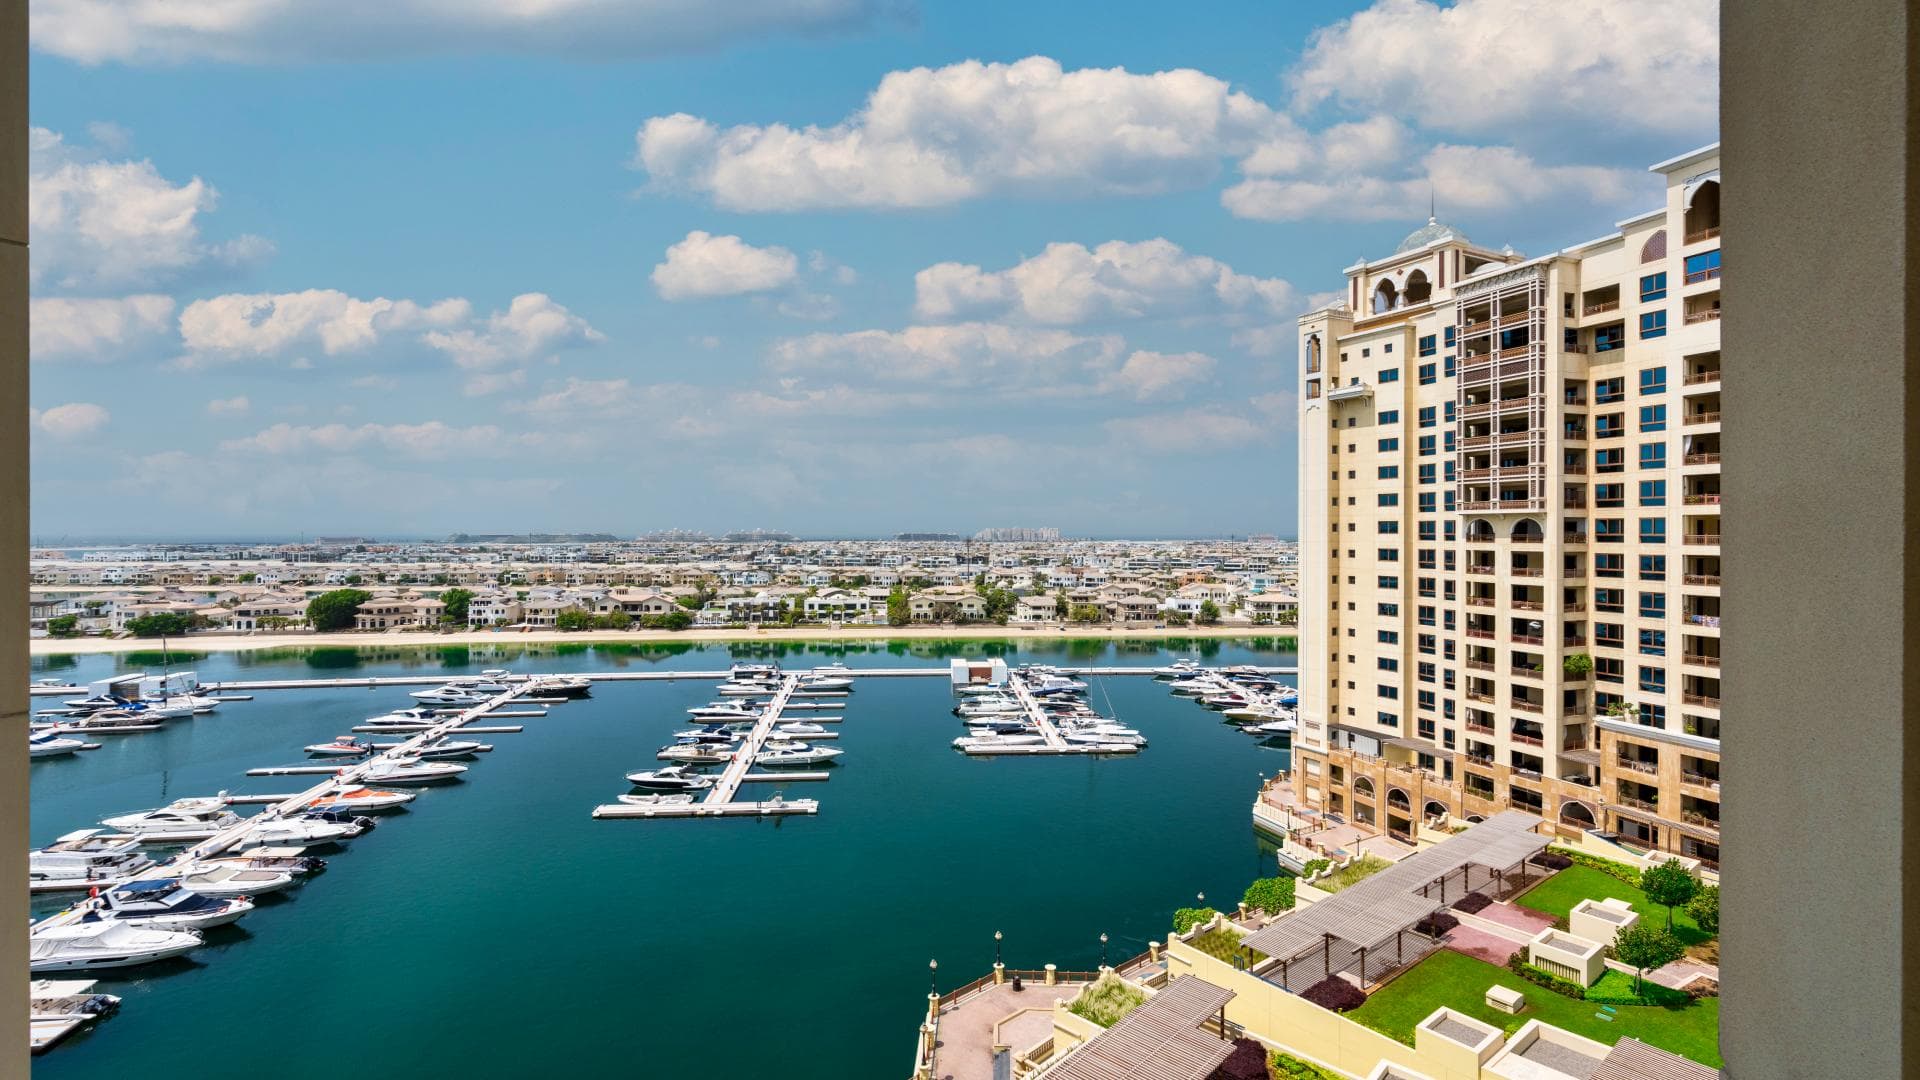 2 Bedroom Apartment For Sale Marina Residences Lp14407 19cc2839eee6a300.jpg